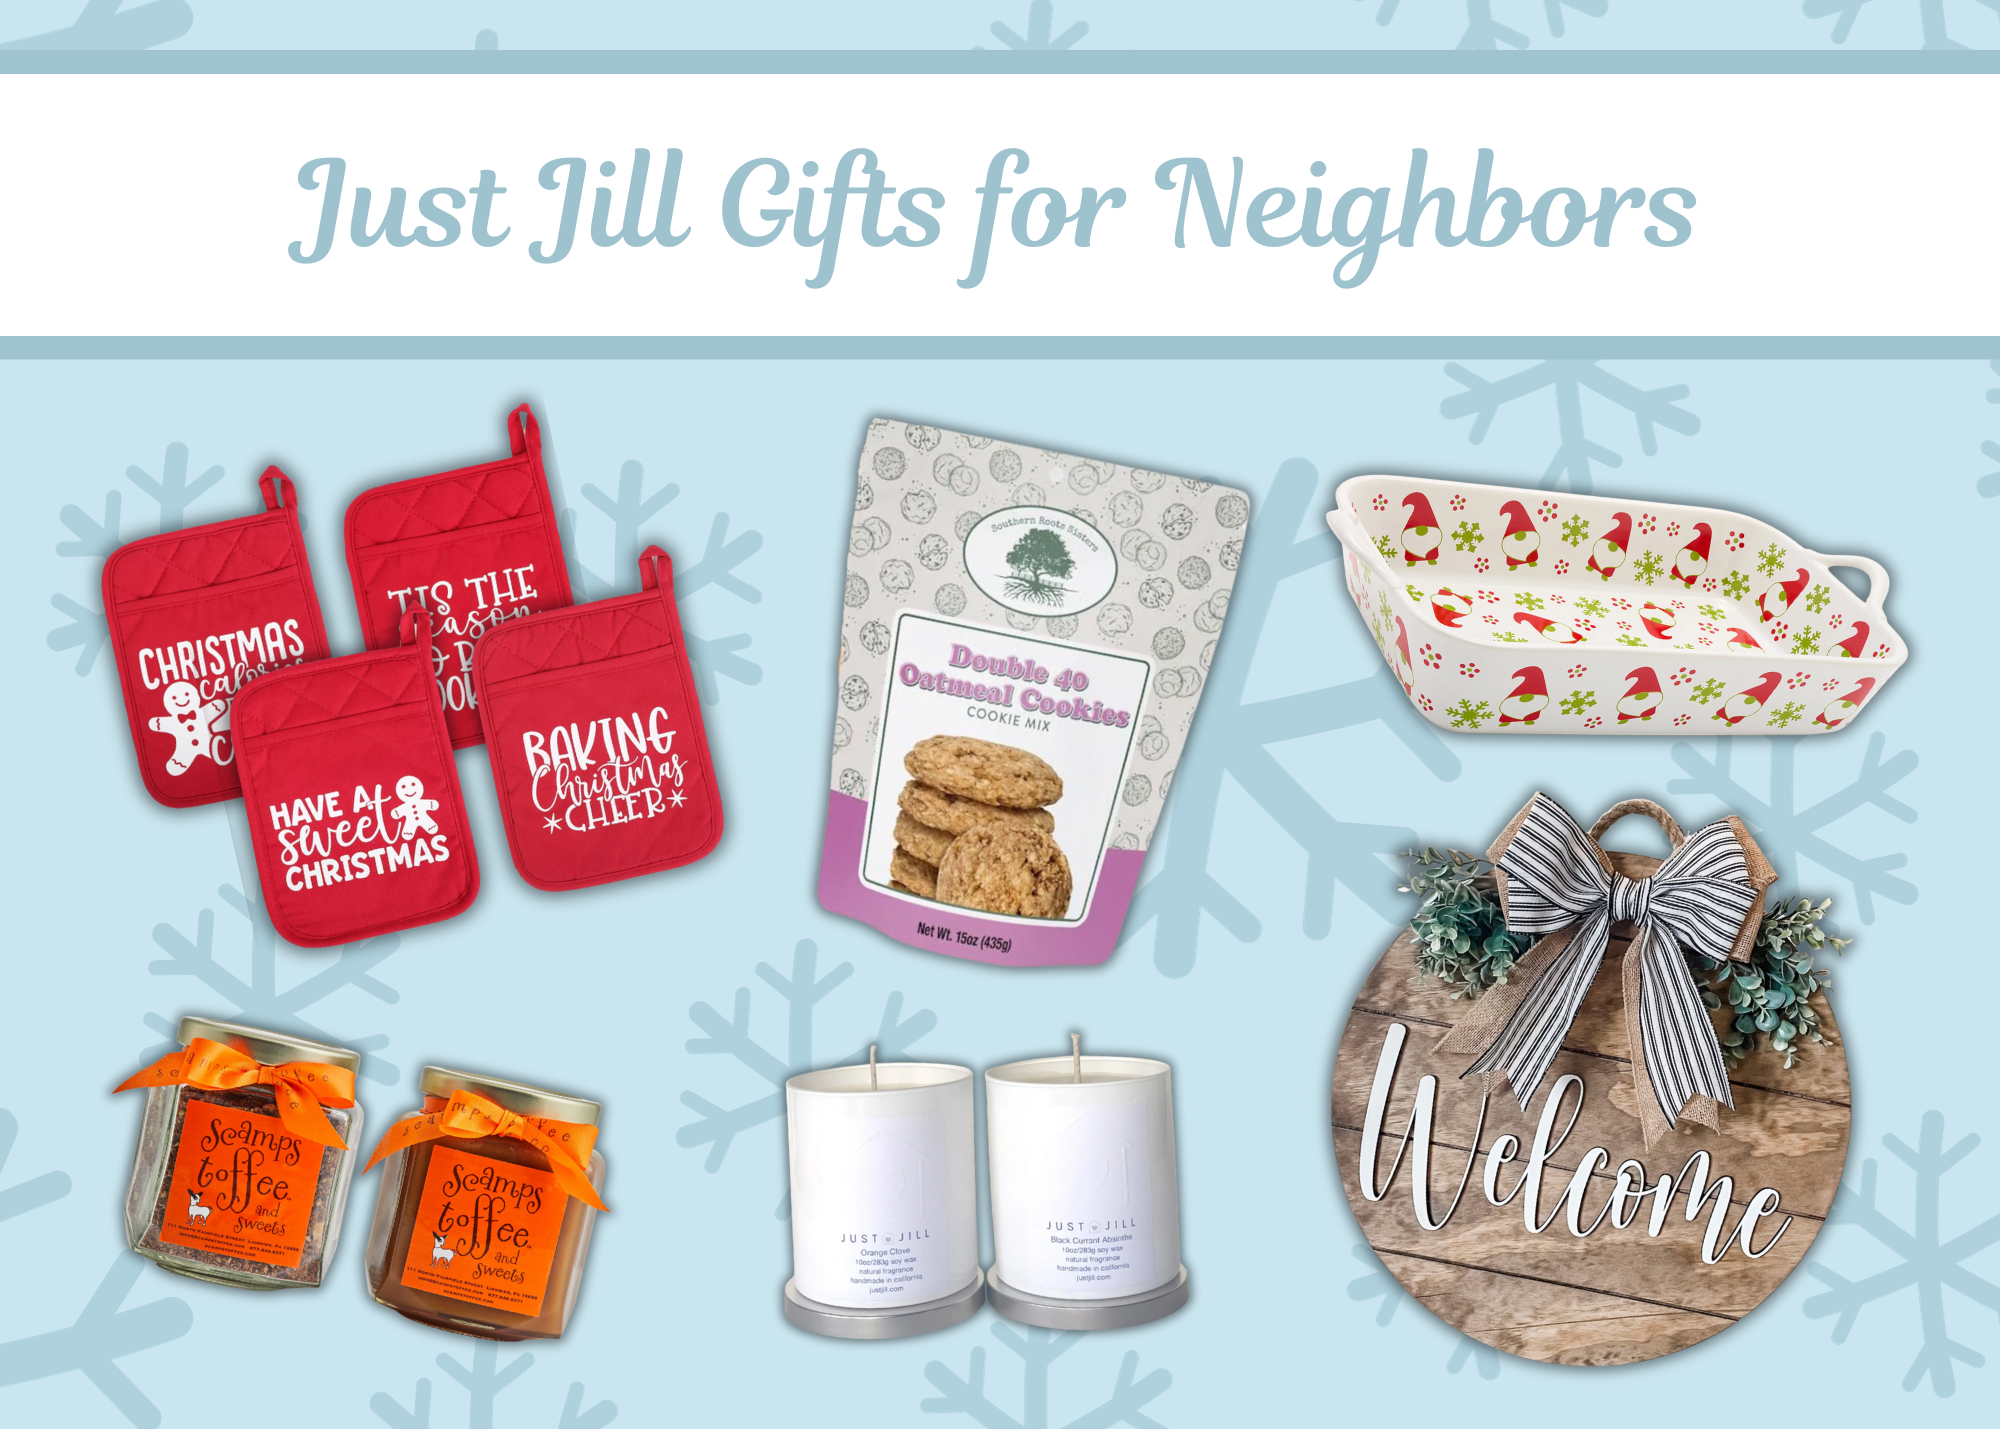 23 Gifts for Neighbors - Just Jill